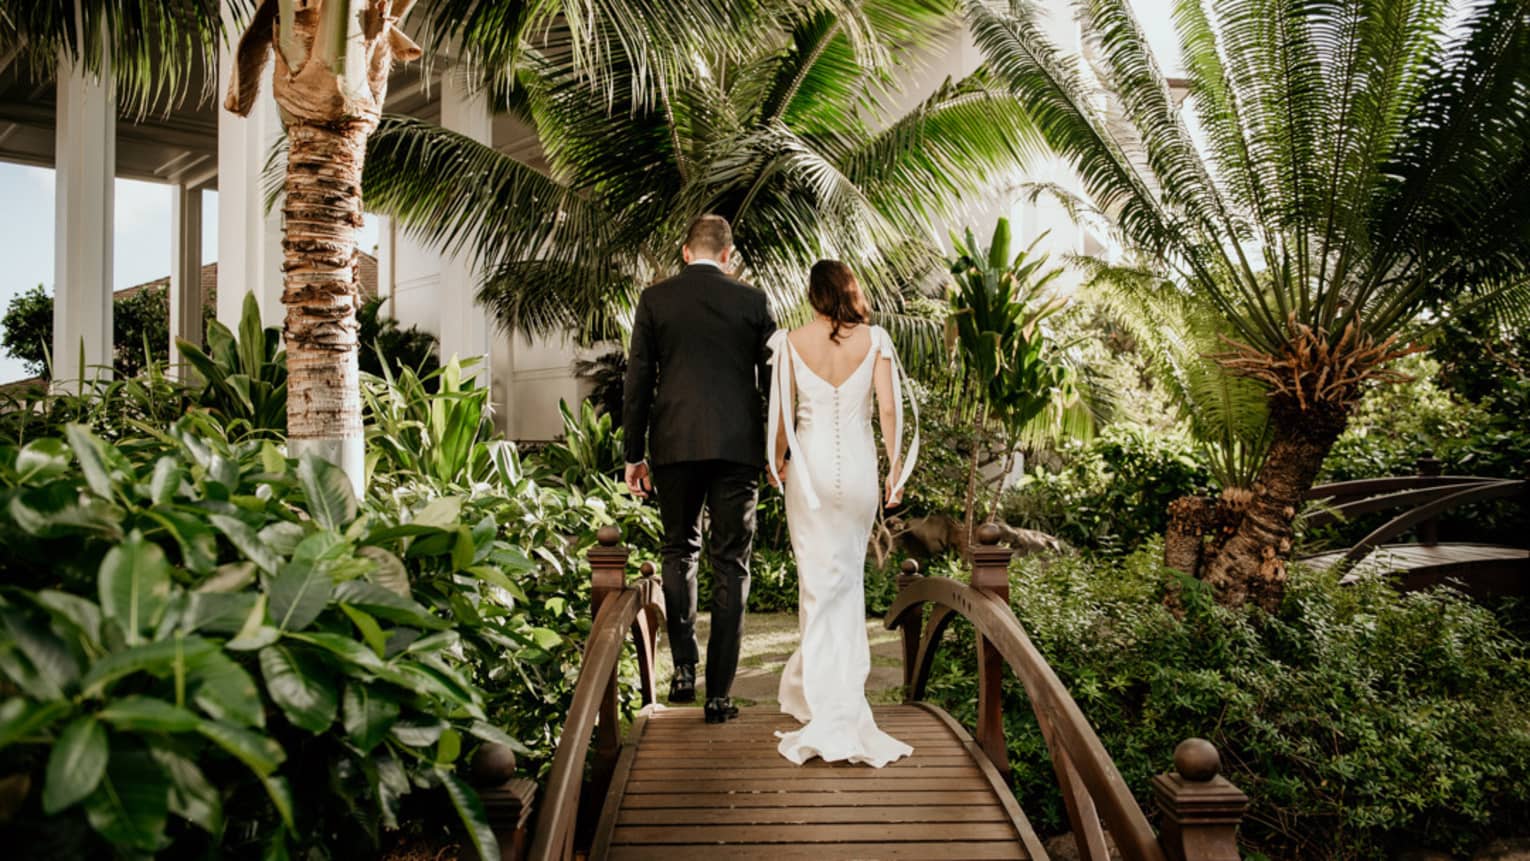 Bride and groom walk away from camera, over small wooden bridge, surrounded by tropical gardens